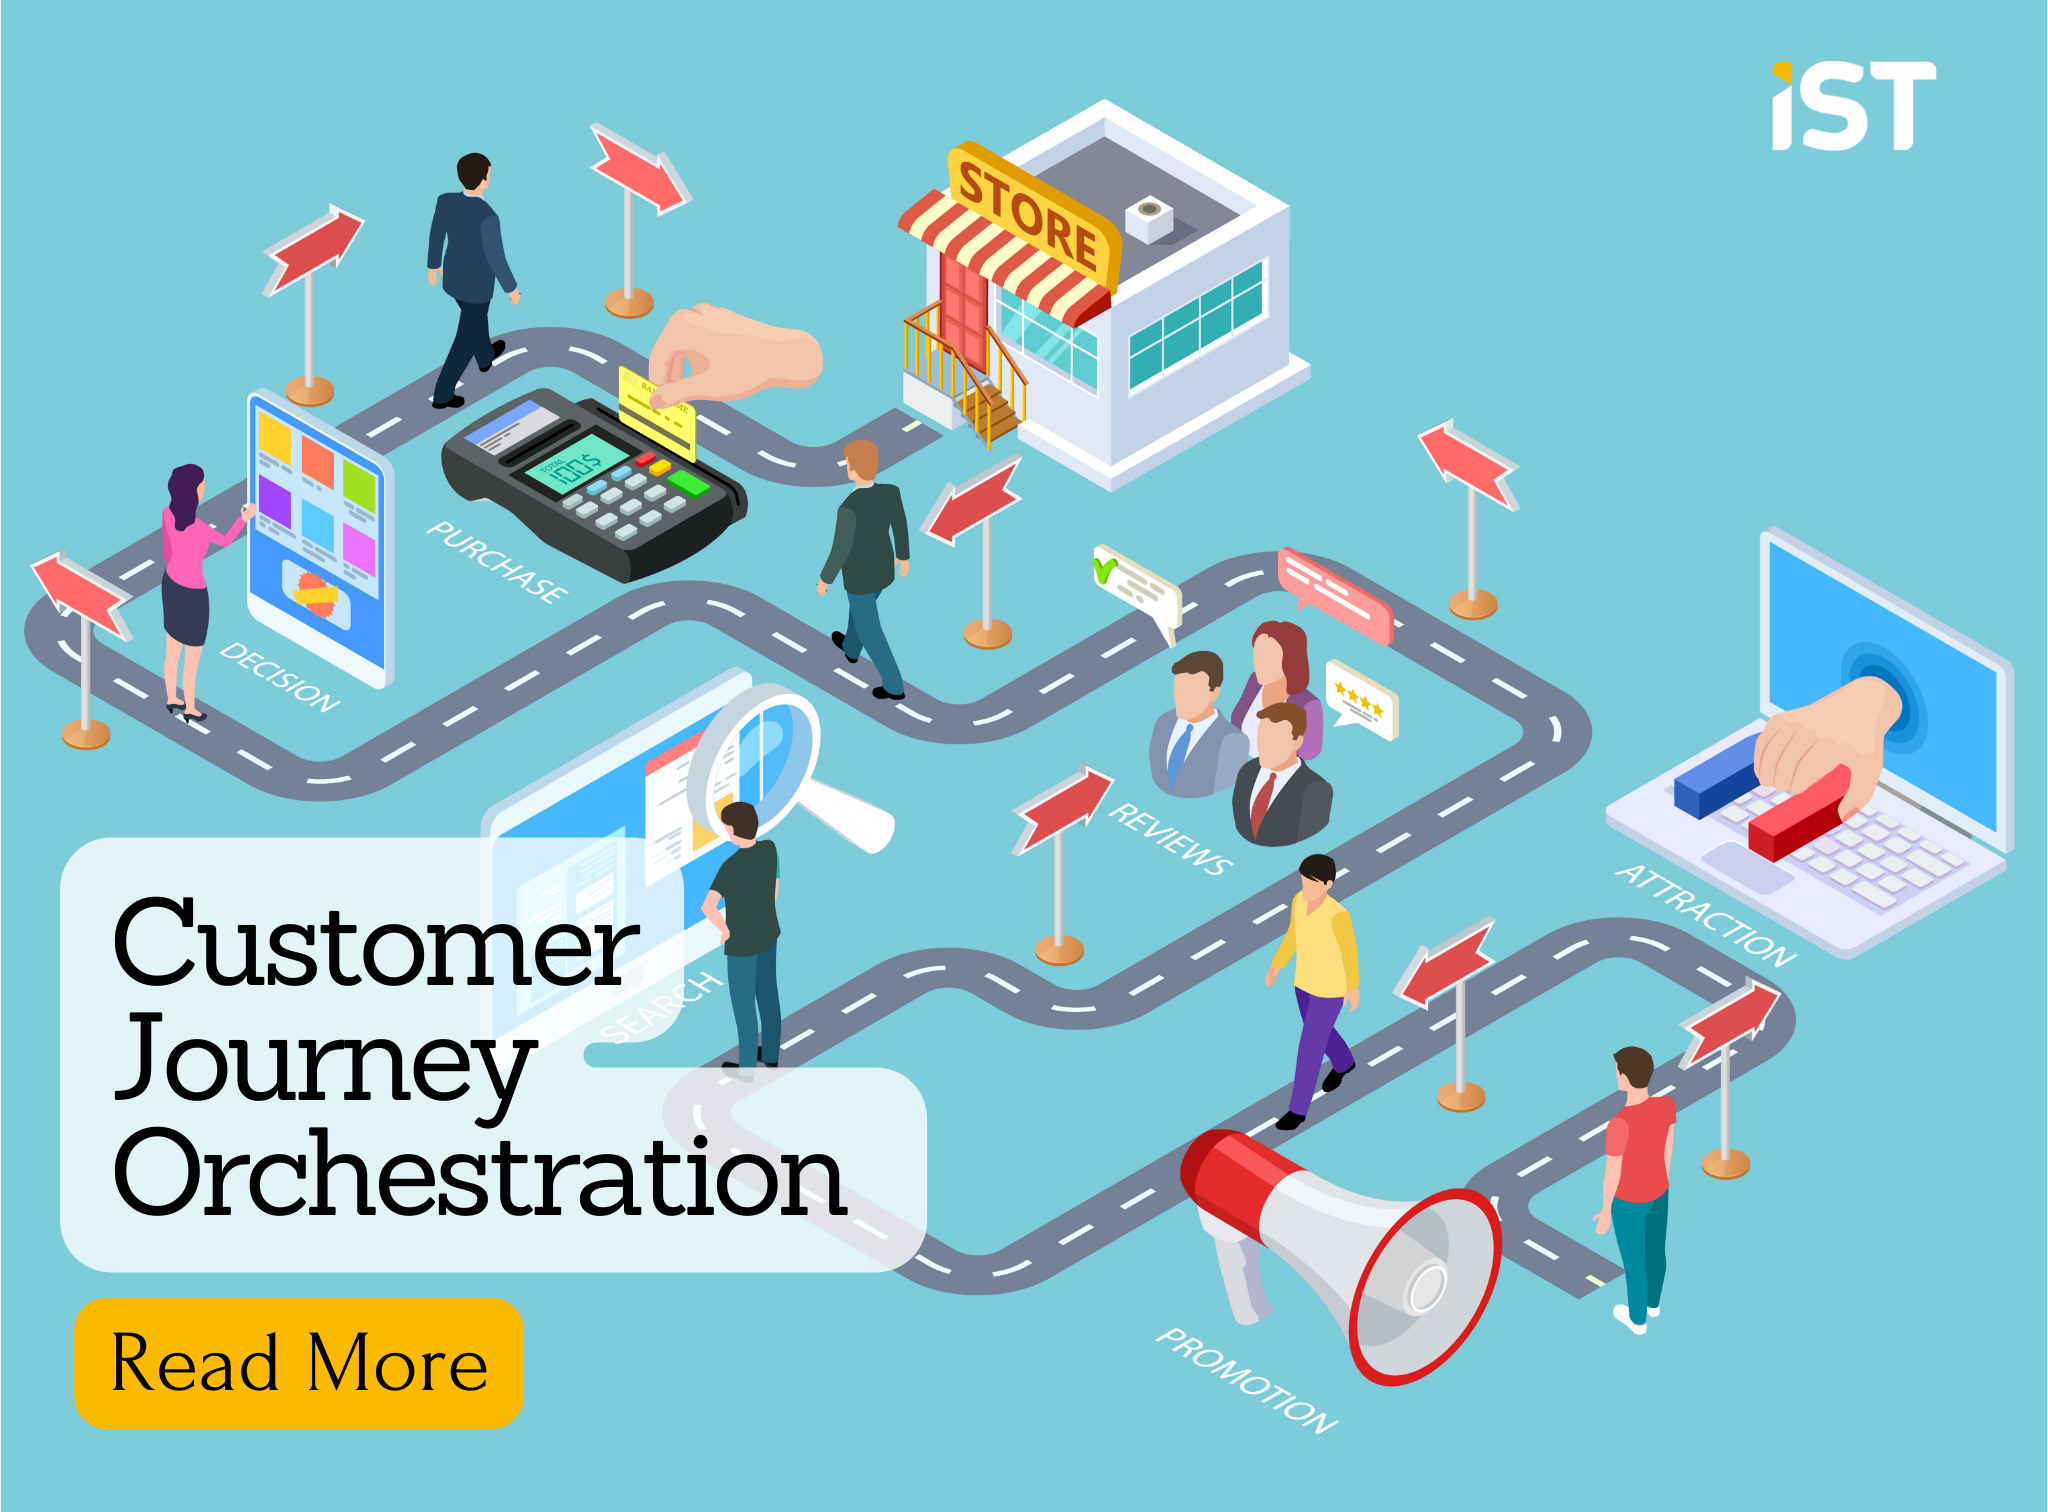 Customer Journey Orchestration (CJO) by IST